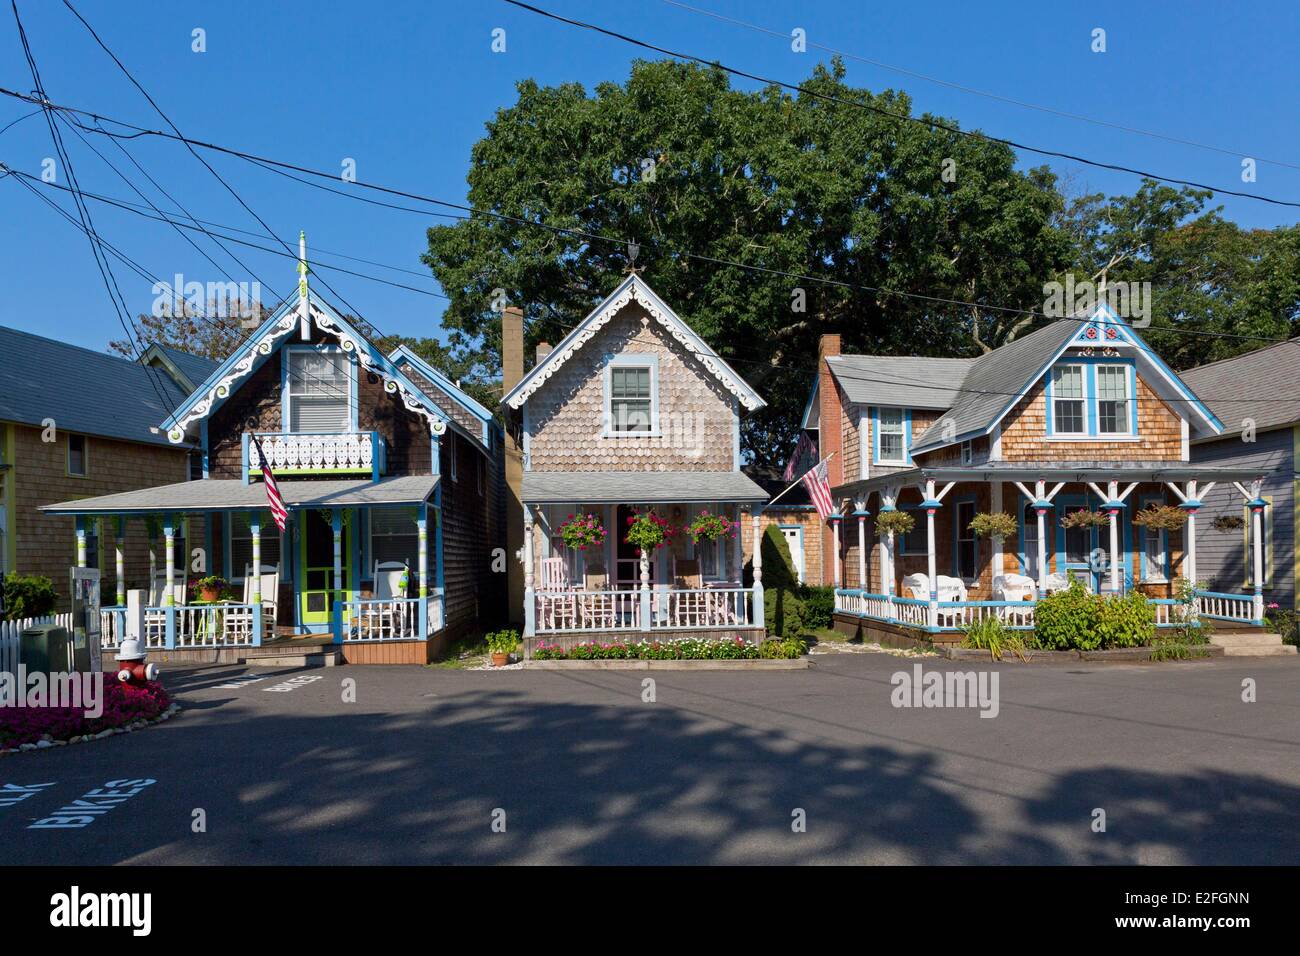 United States Massachusetts Cape Cod Martha's Vineyard island Oak Bluffs the Campground Trinity Park and its Gingerbread Stock Photo